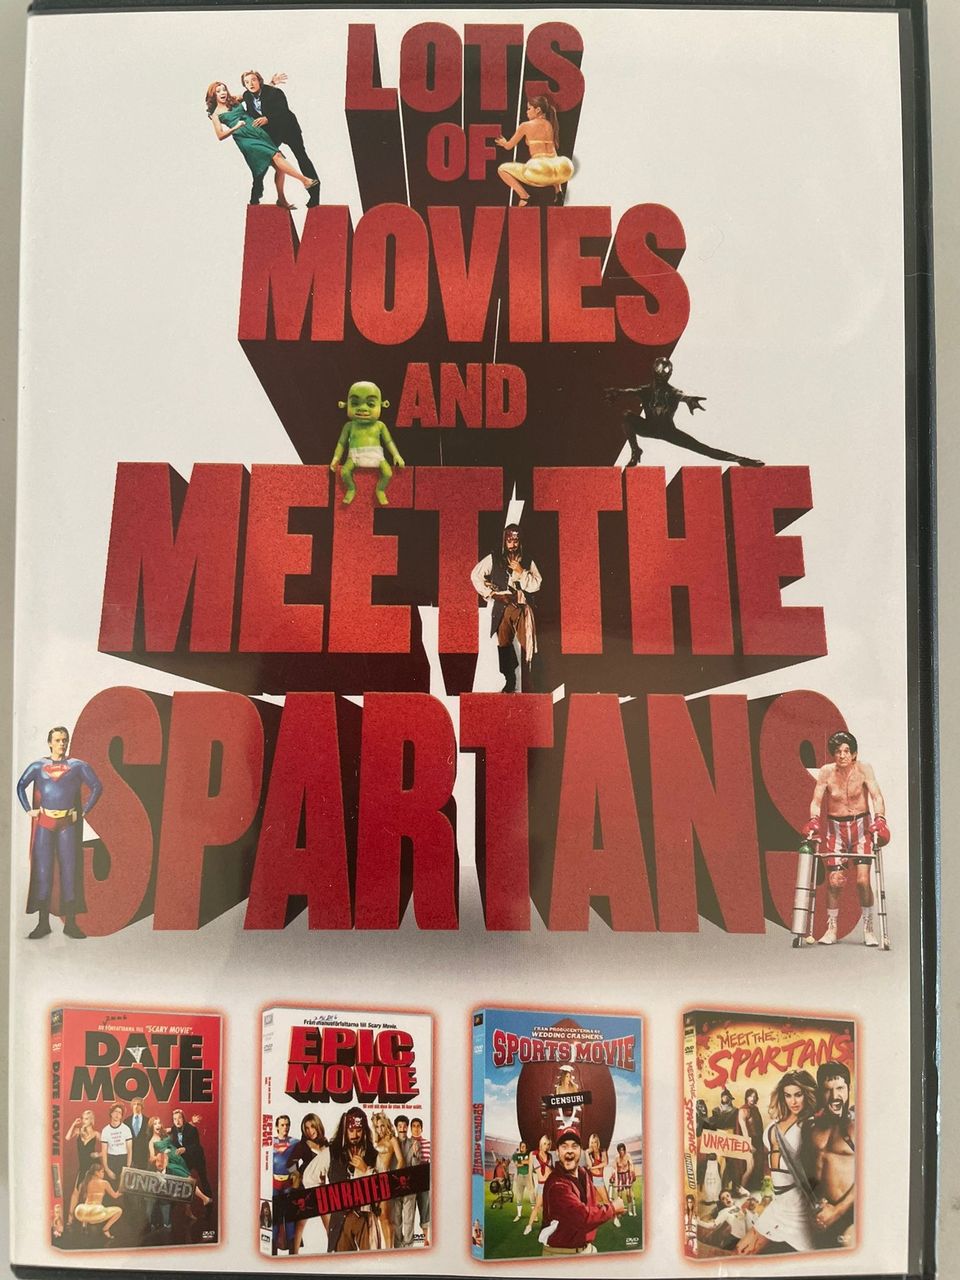 DVD Box Lots Of Movies And Meet The Spartans